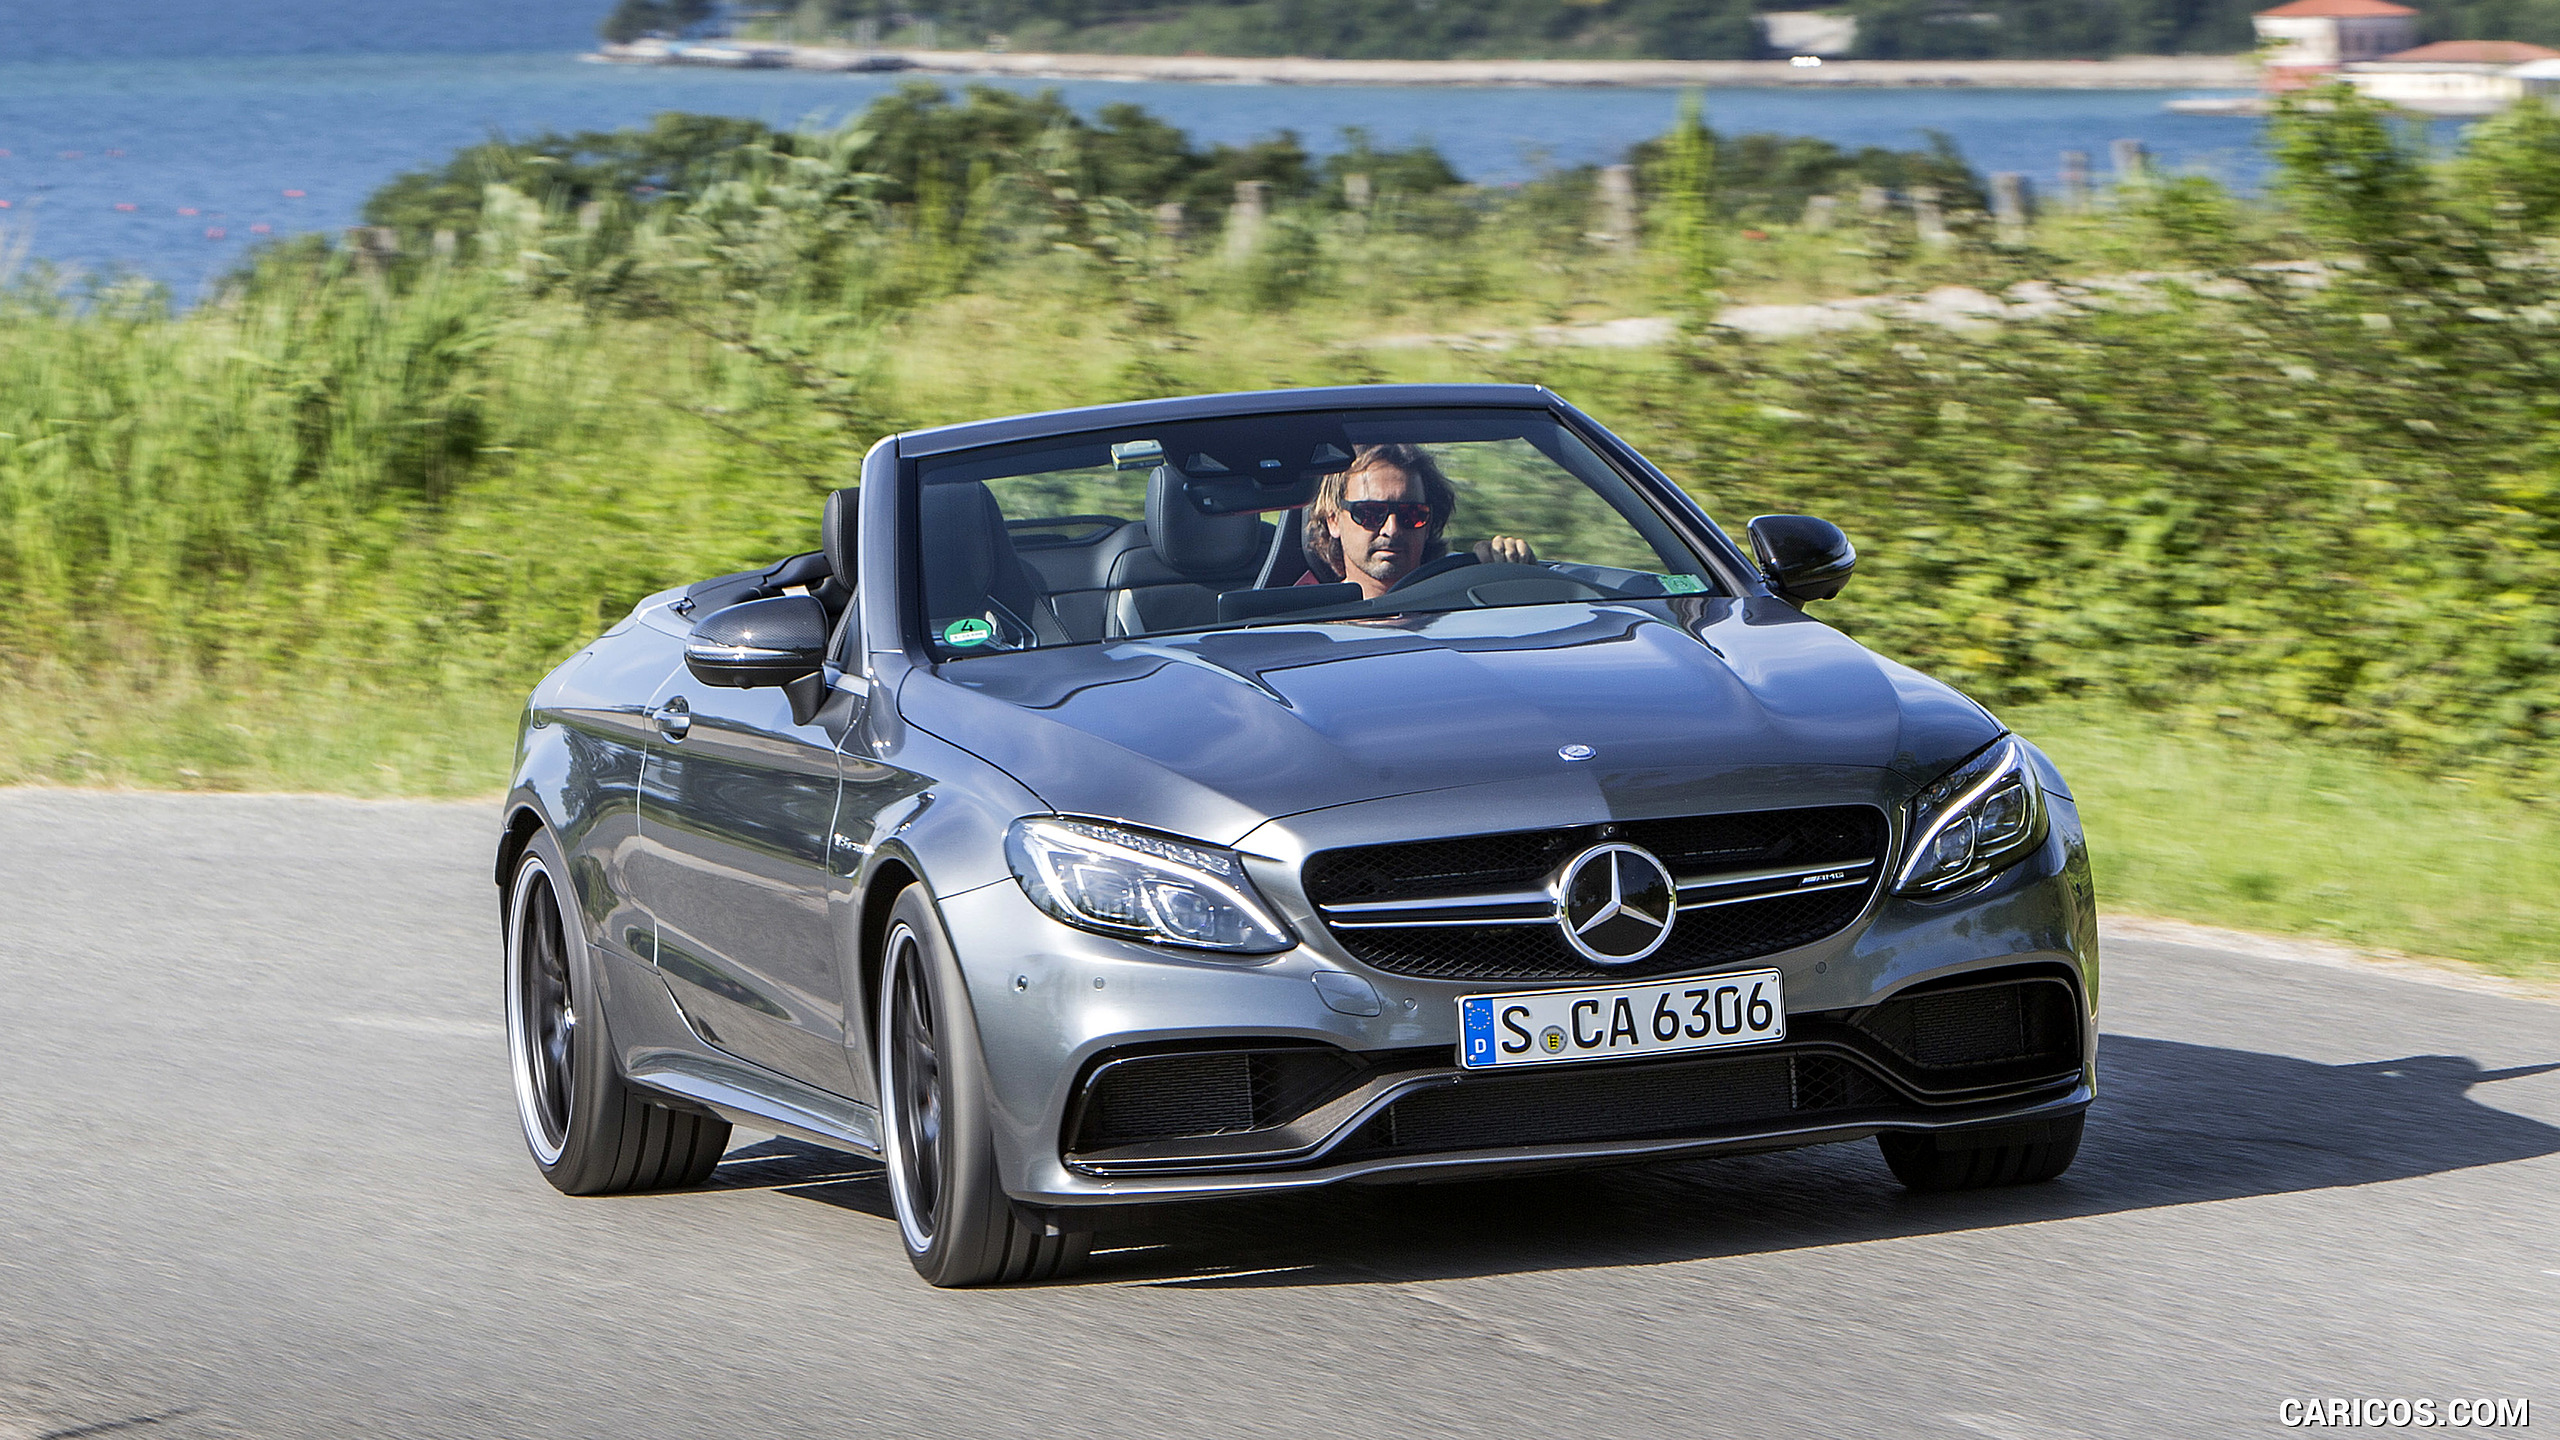 2017 Mercedes-AMG C63 S Cabriolet - Front, #33 of 222